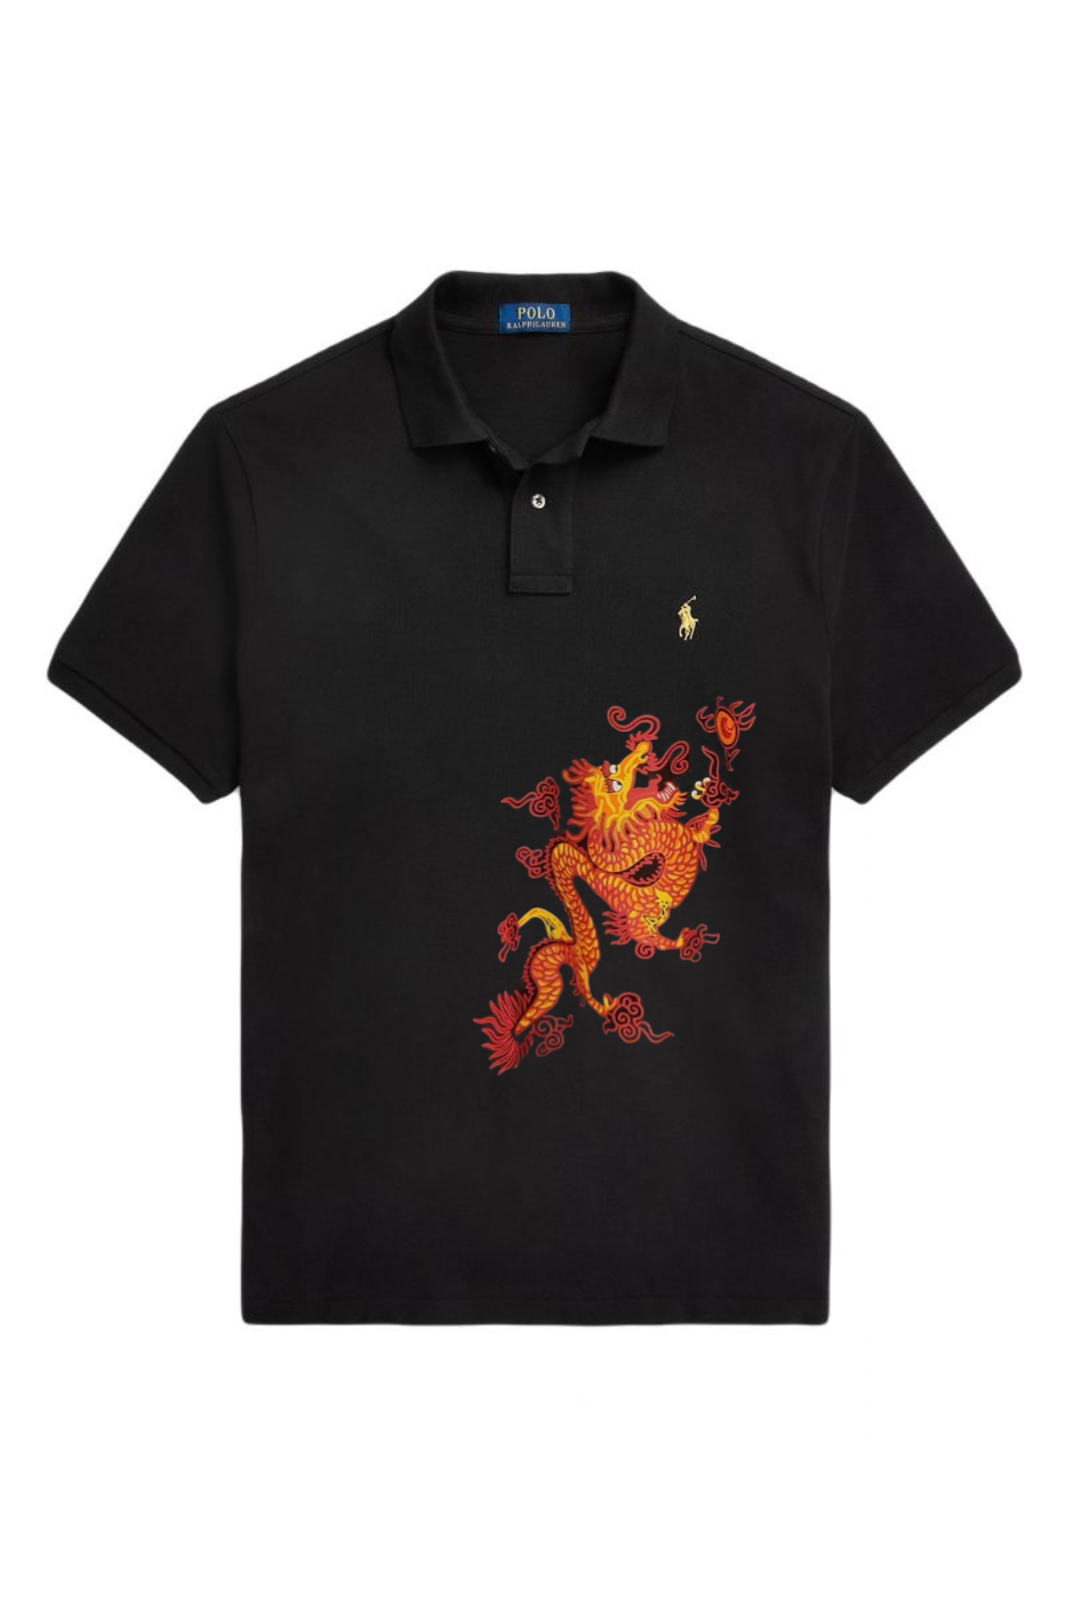 P-Beast Polo Black 24 (Limited Edition)